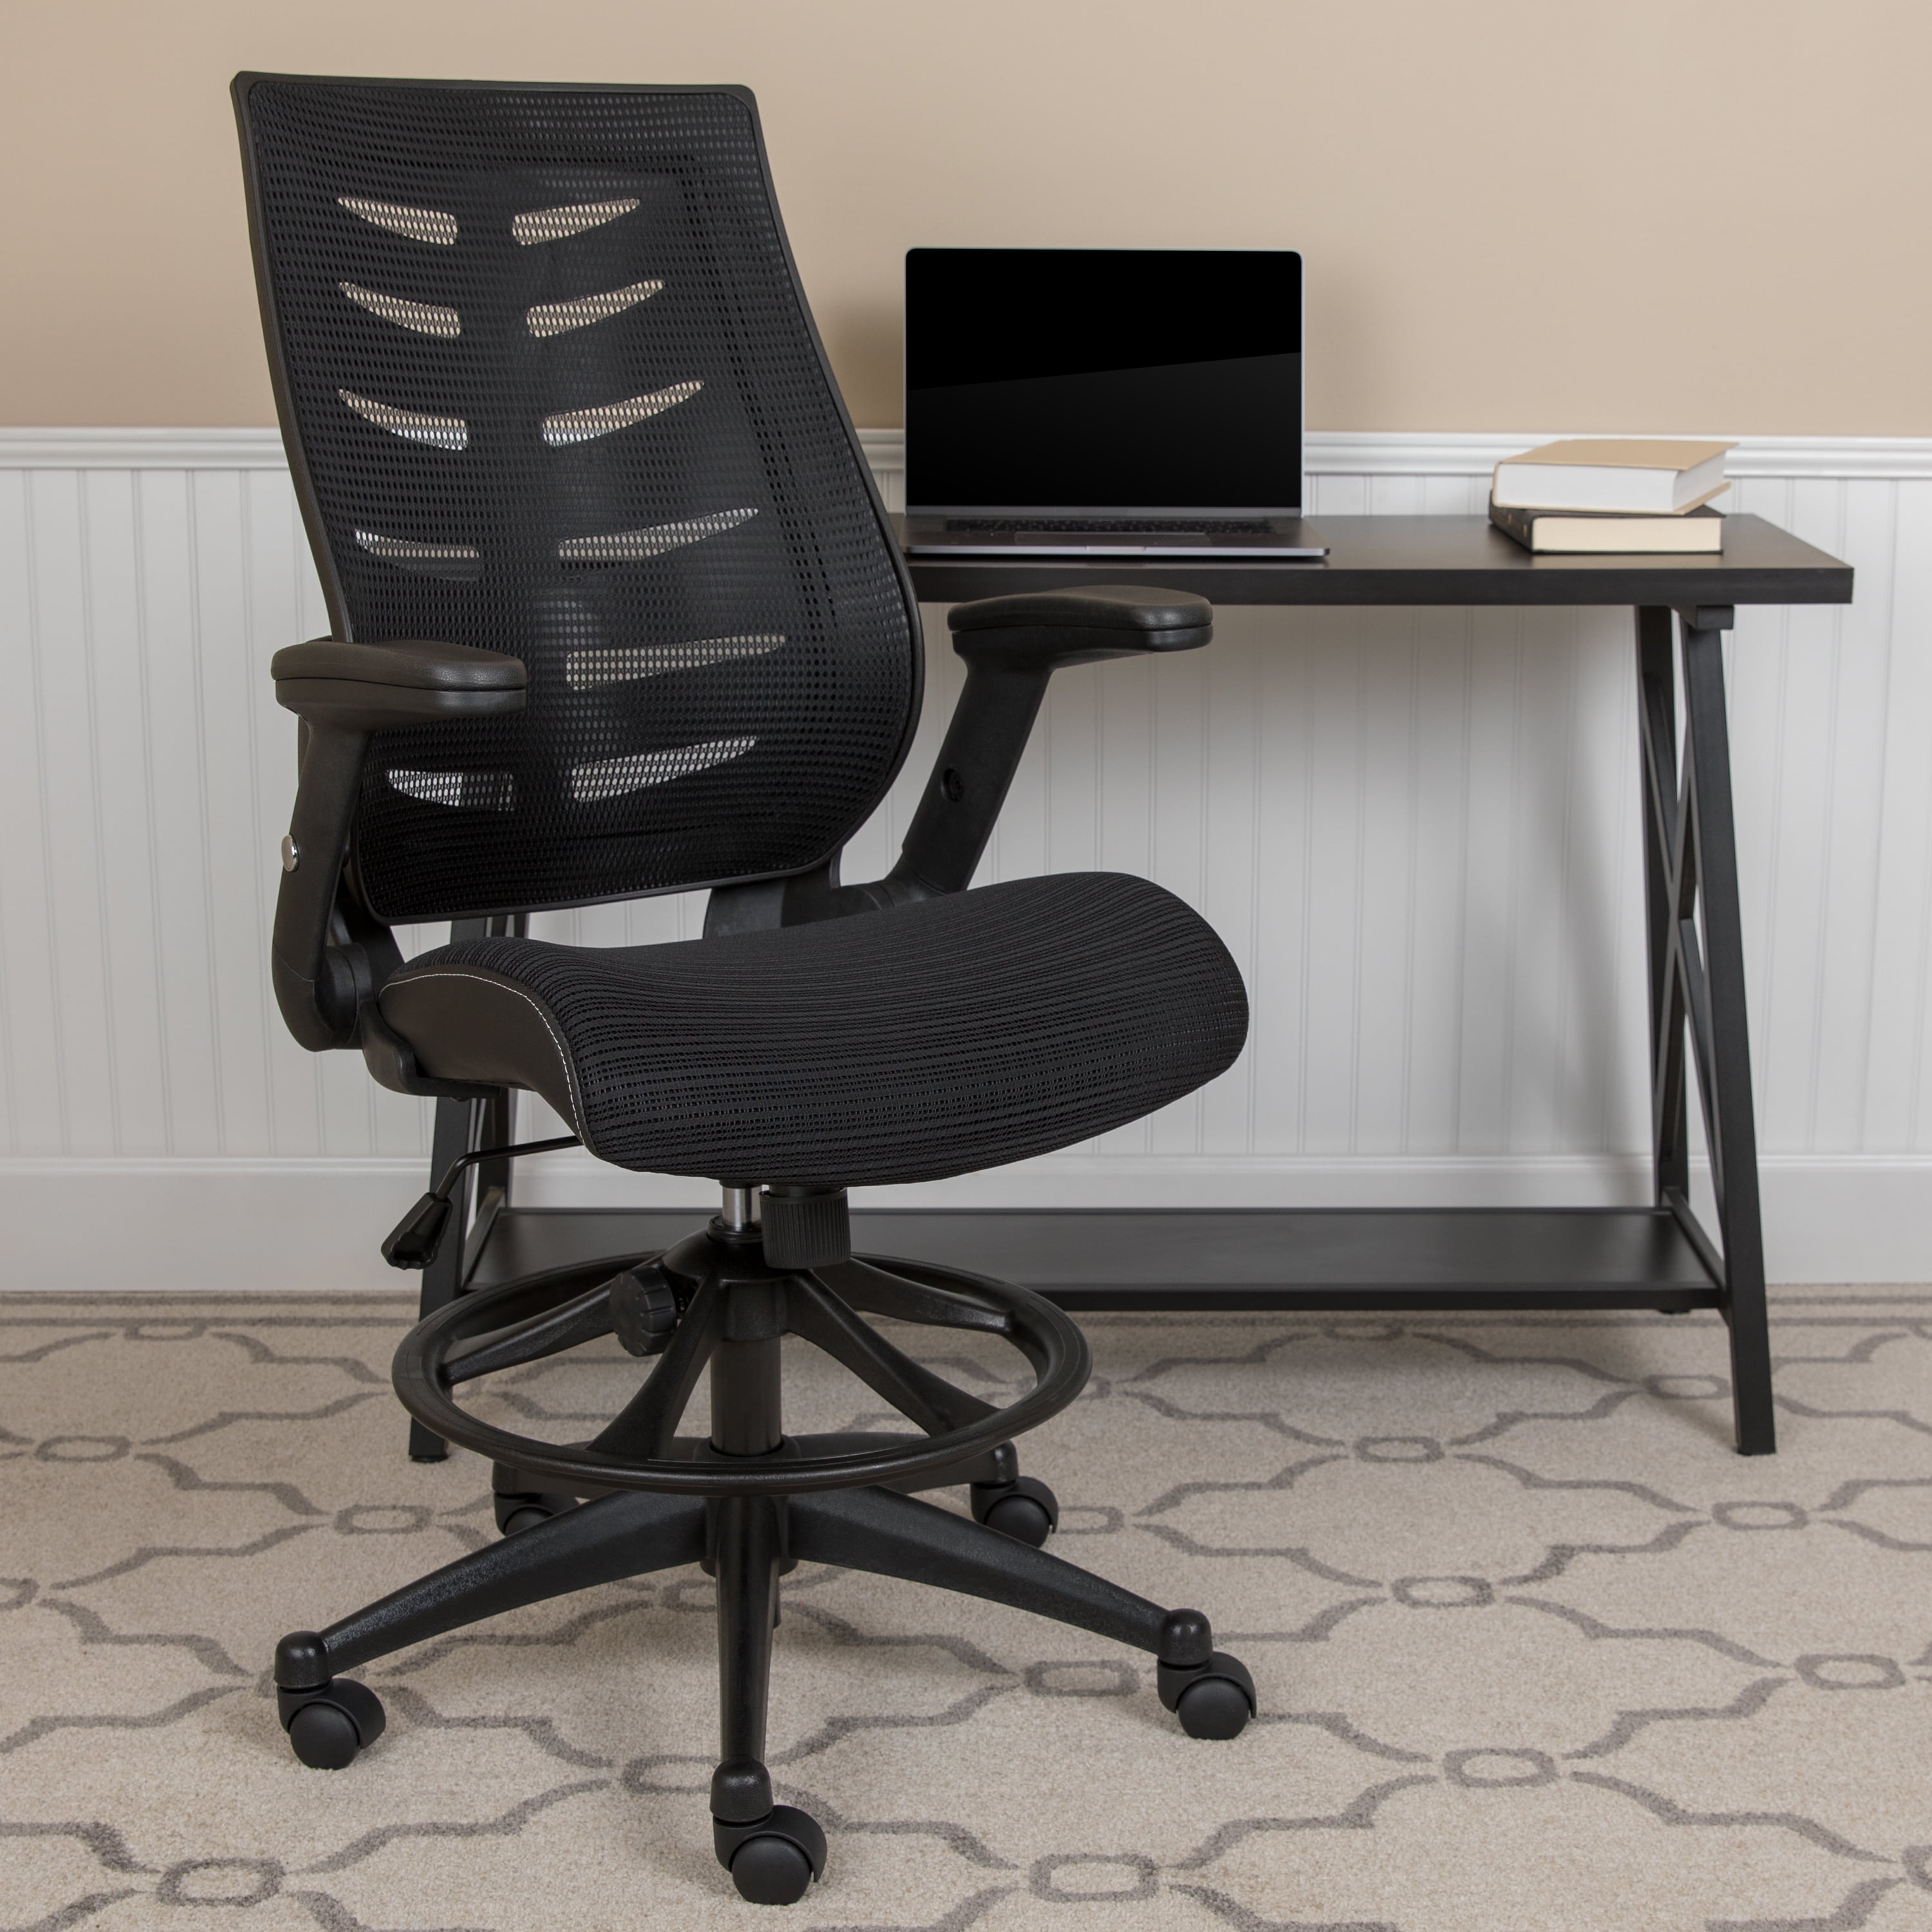 EMMA OLIVER Mid-Back Black Mesh Ergonomic Drafting Chair with Foot Ring and Flip-Up Arms 